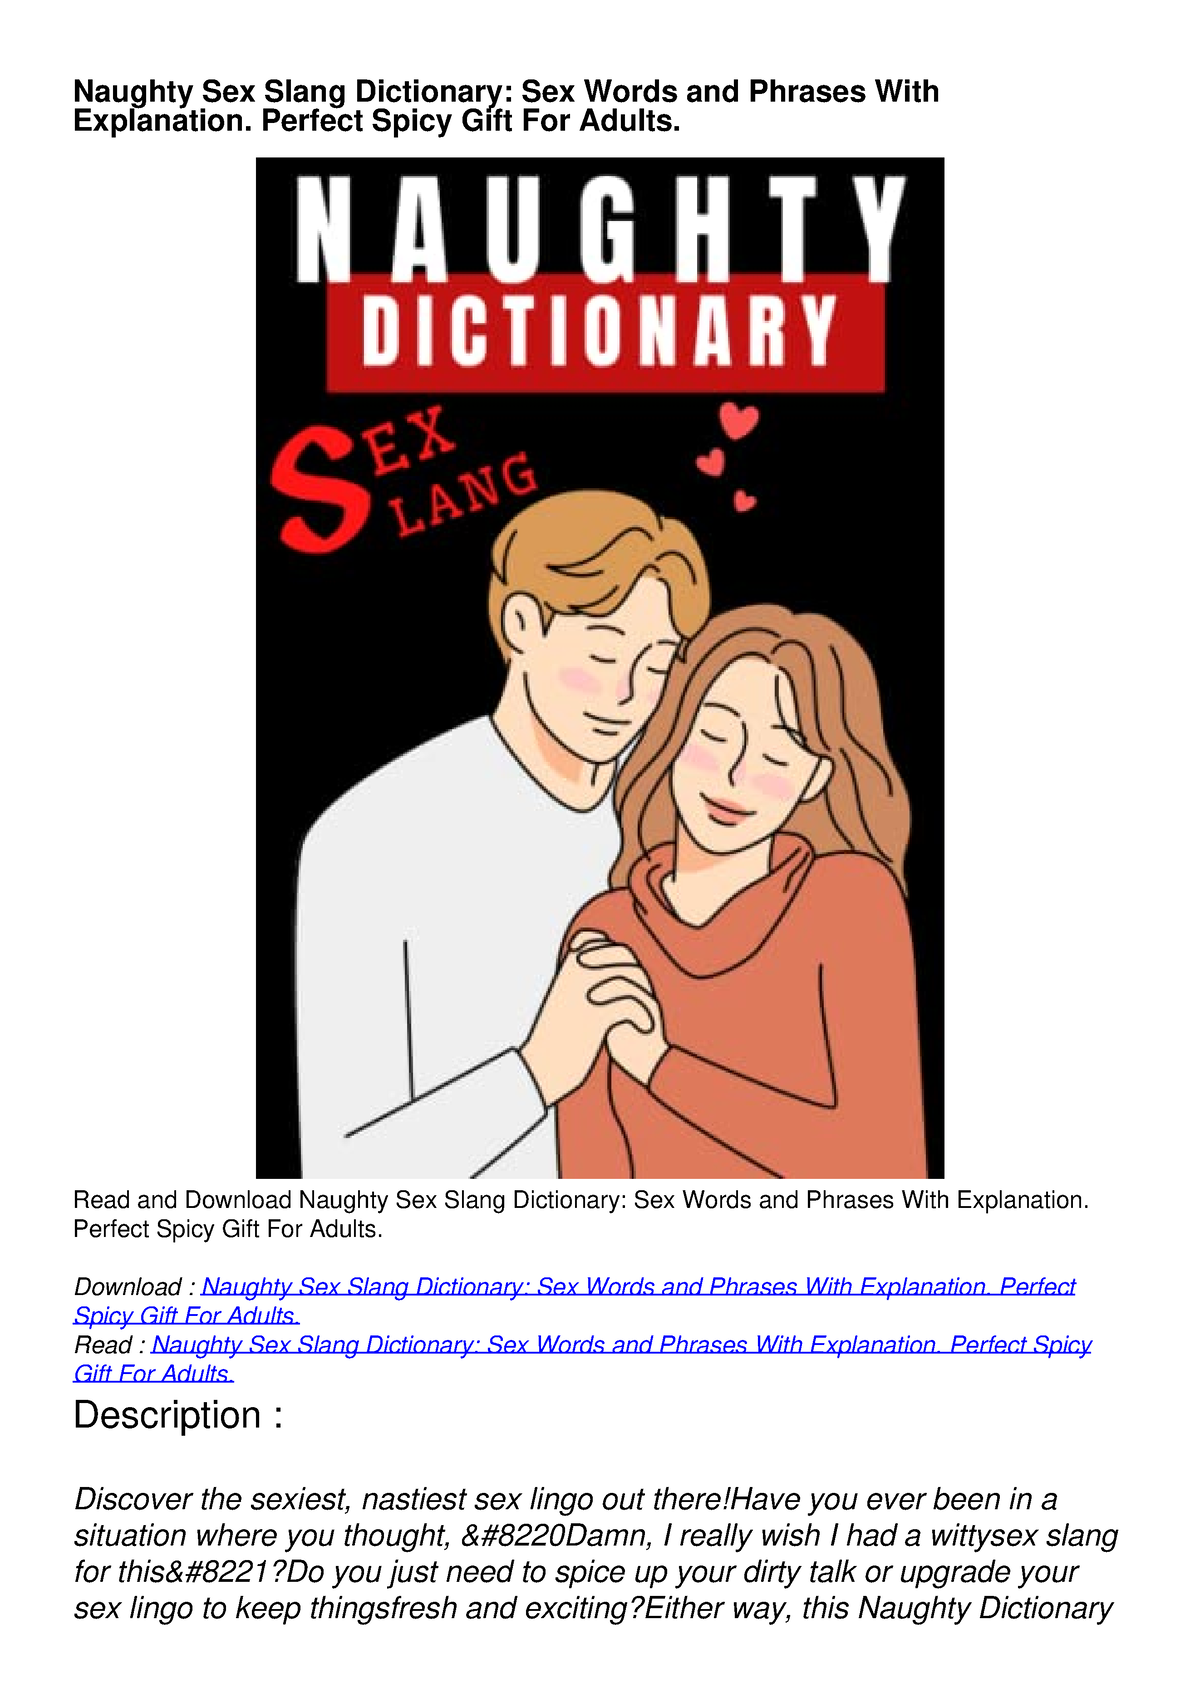 Epub Naughty Sex Slang Dictionary Sex Words And Phrases With Explanation Perfect Full Download 